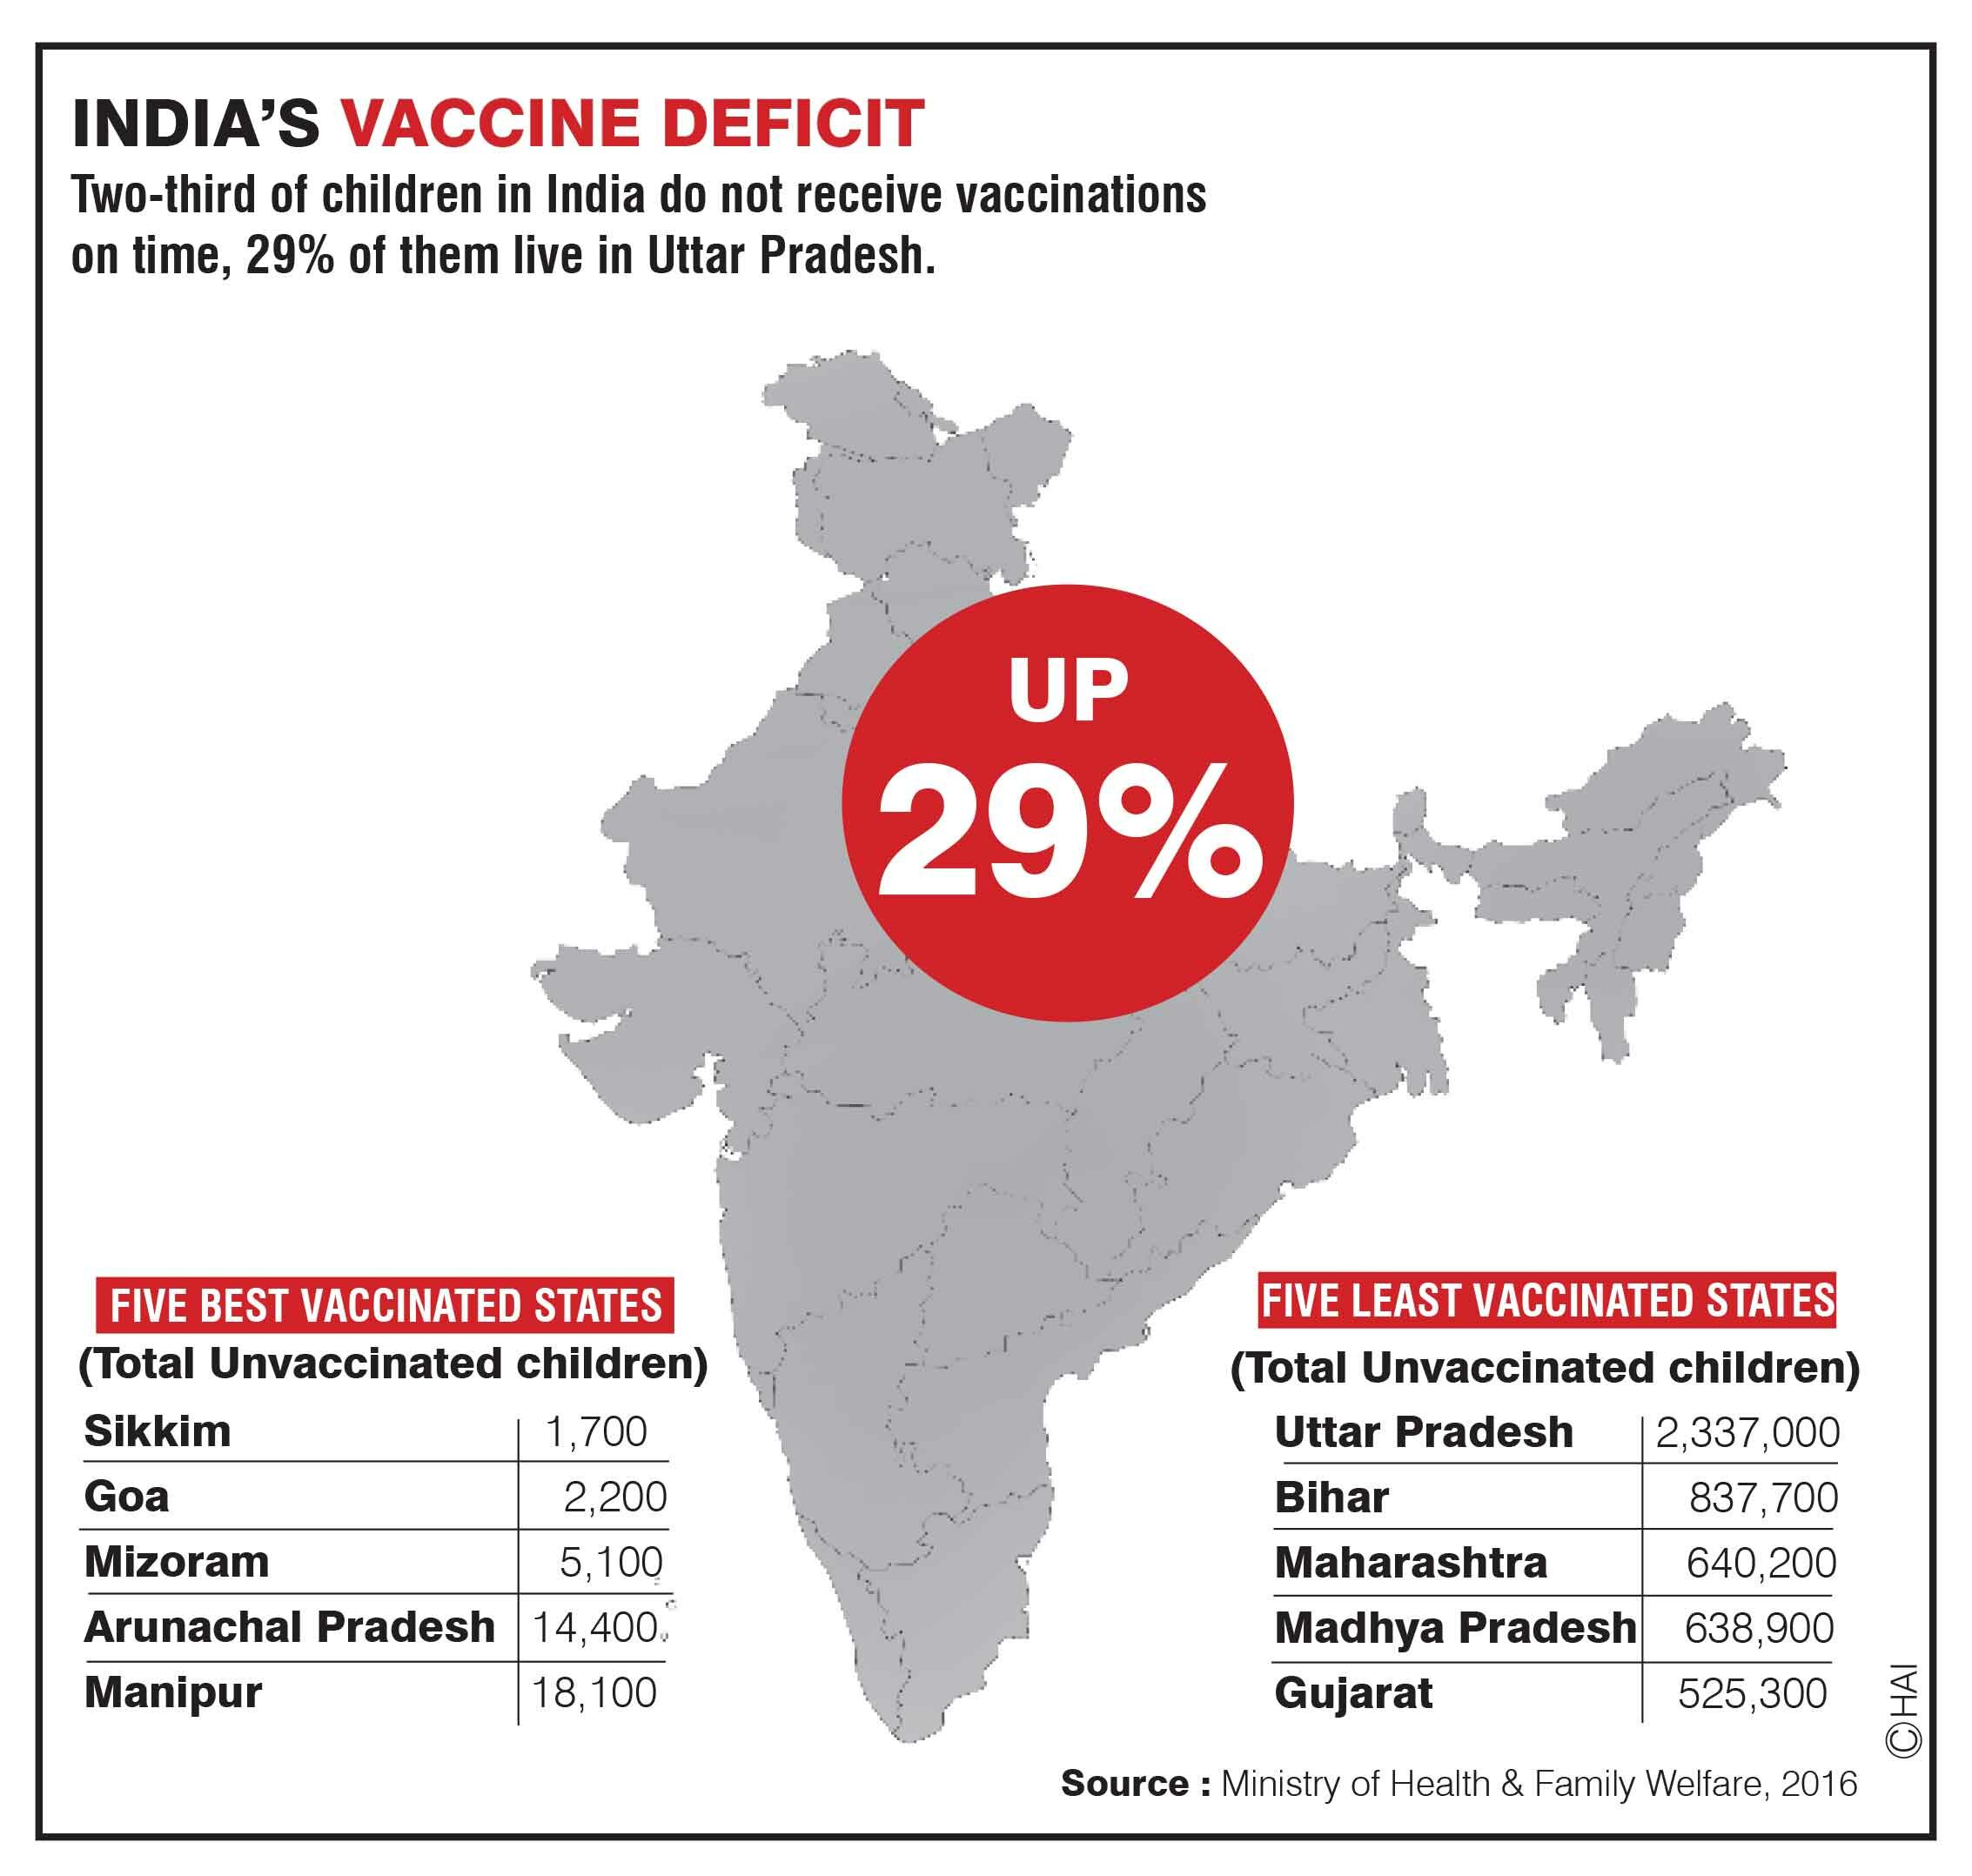 20 lakh children not vaccinated in UP 